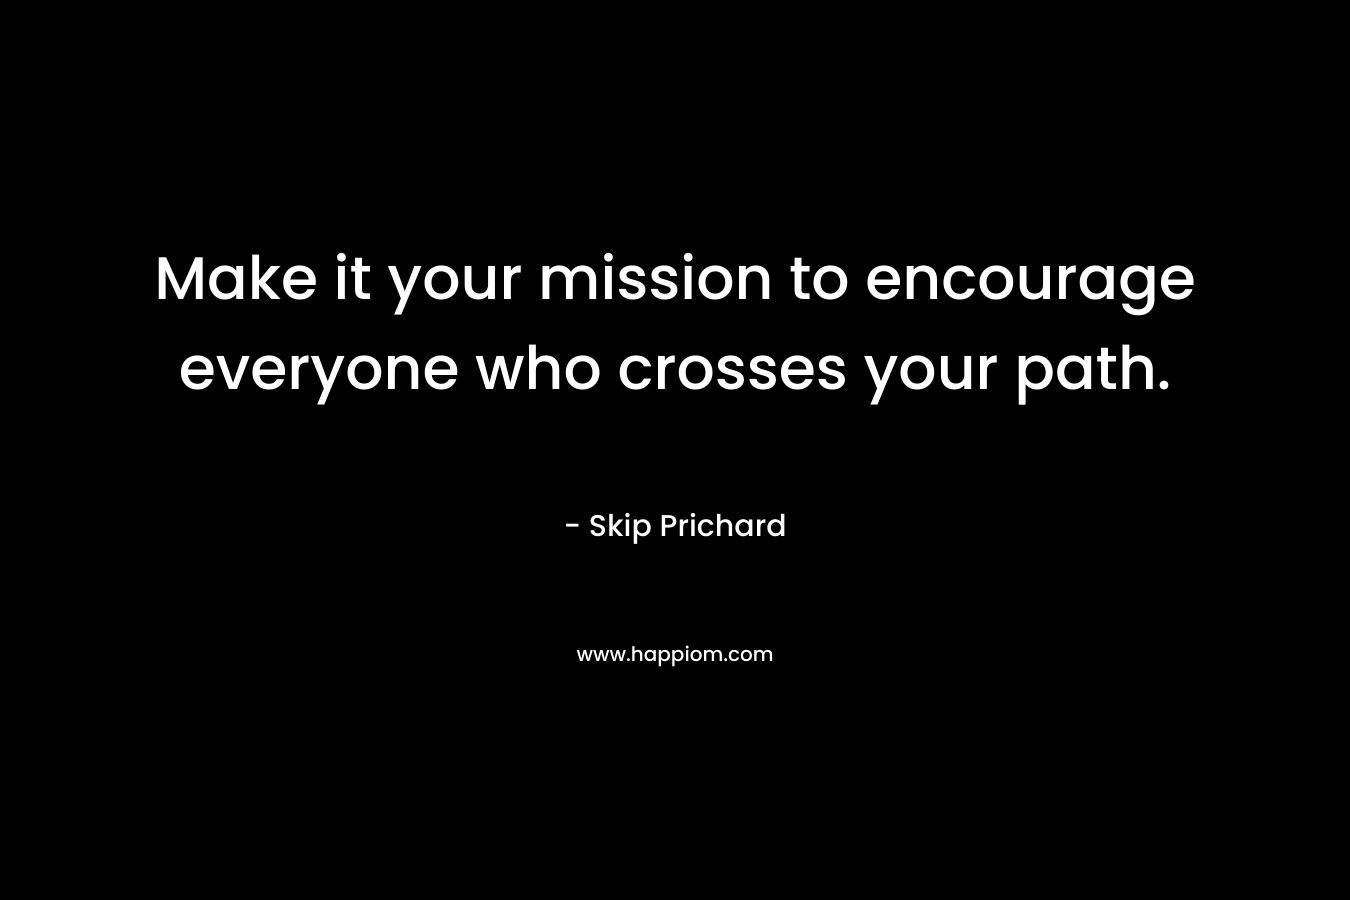 Make it your mission to encourage everyone who crosses your path. – Skip Prichard